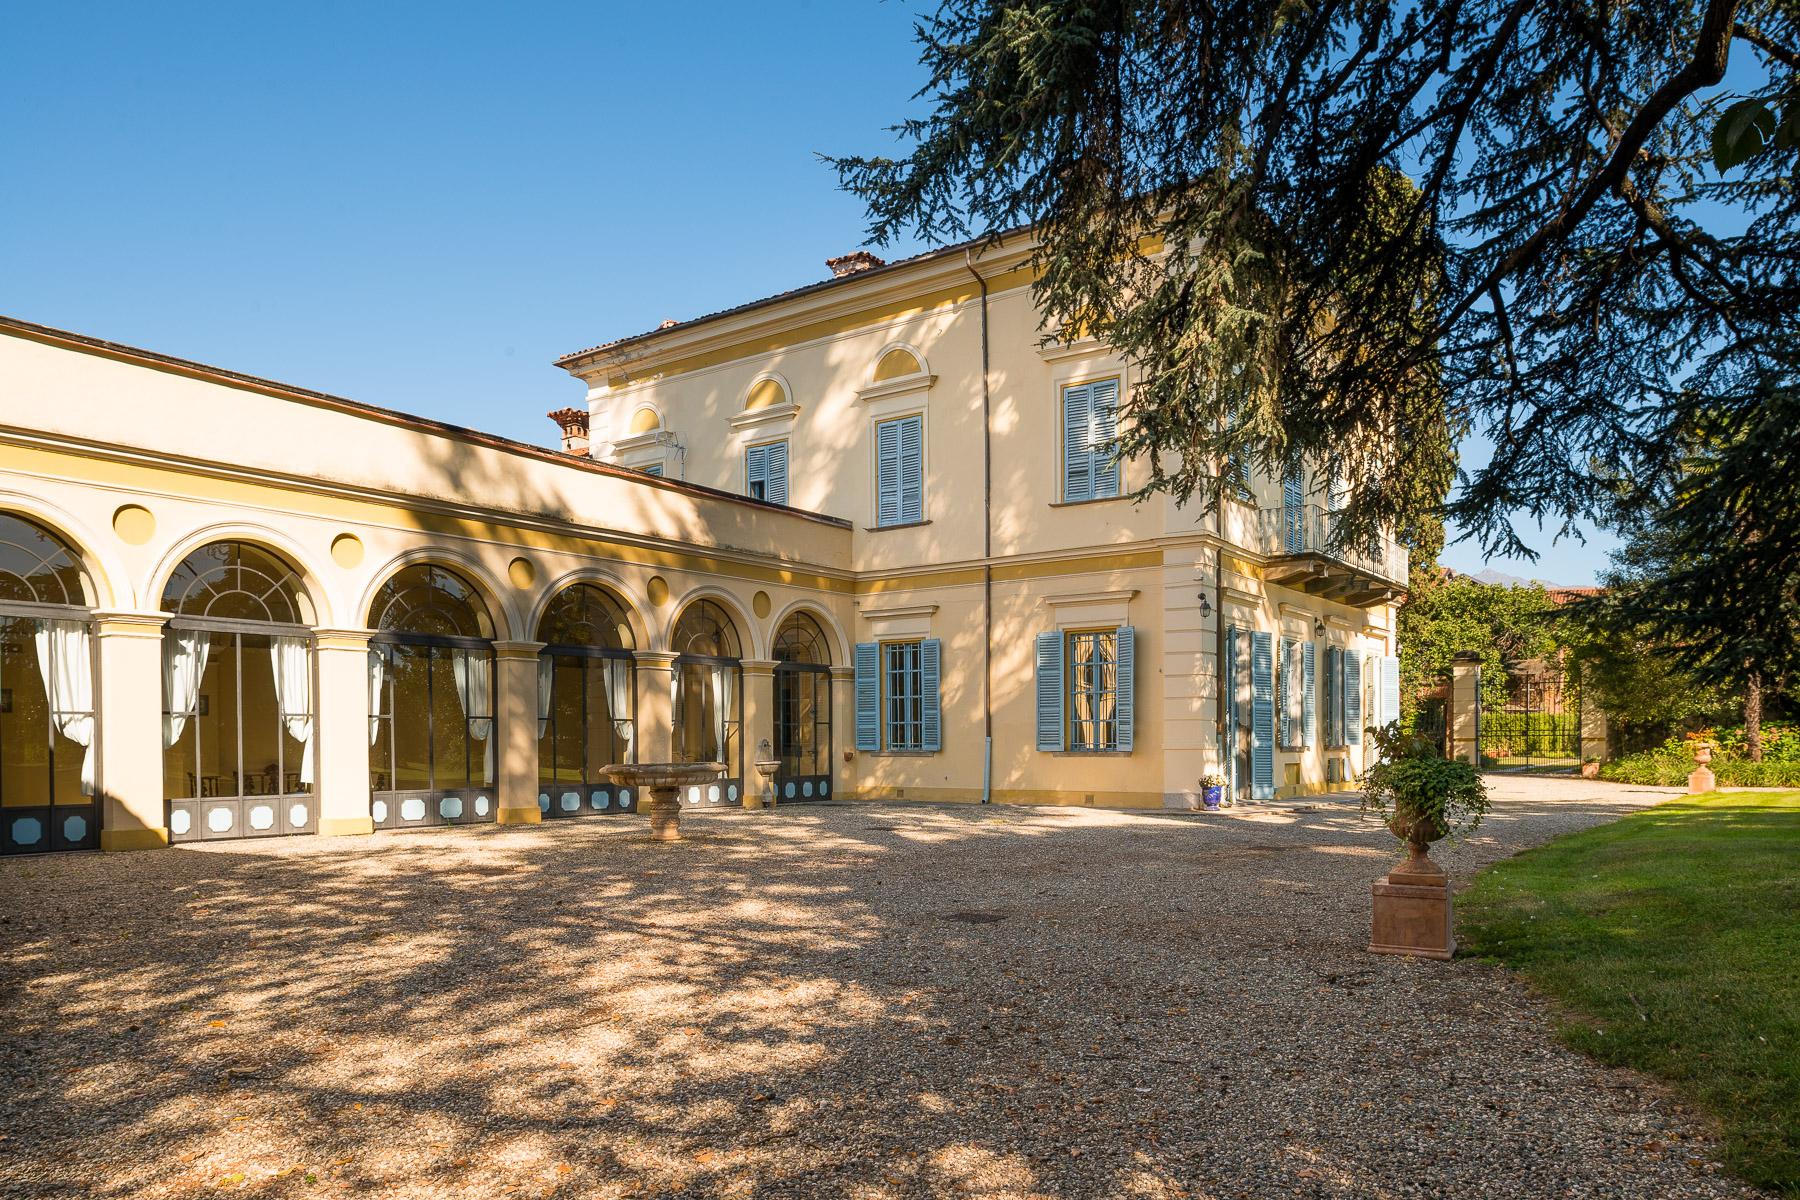 Elegant Villa in the Canavese countryside - 1